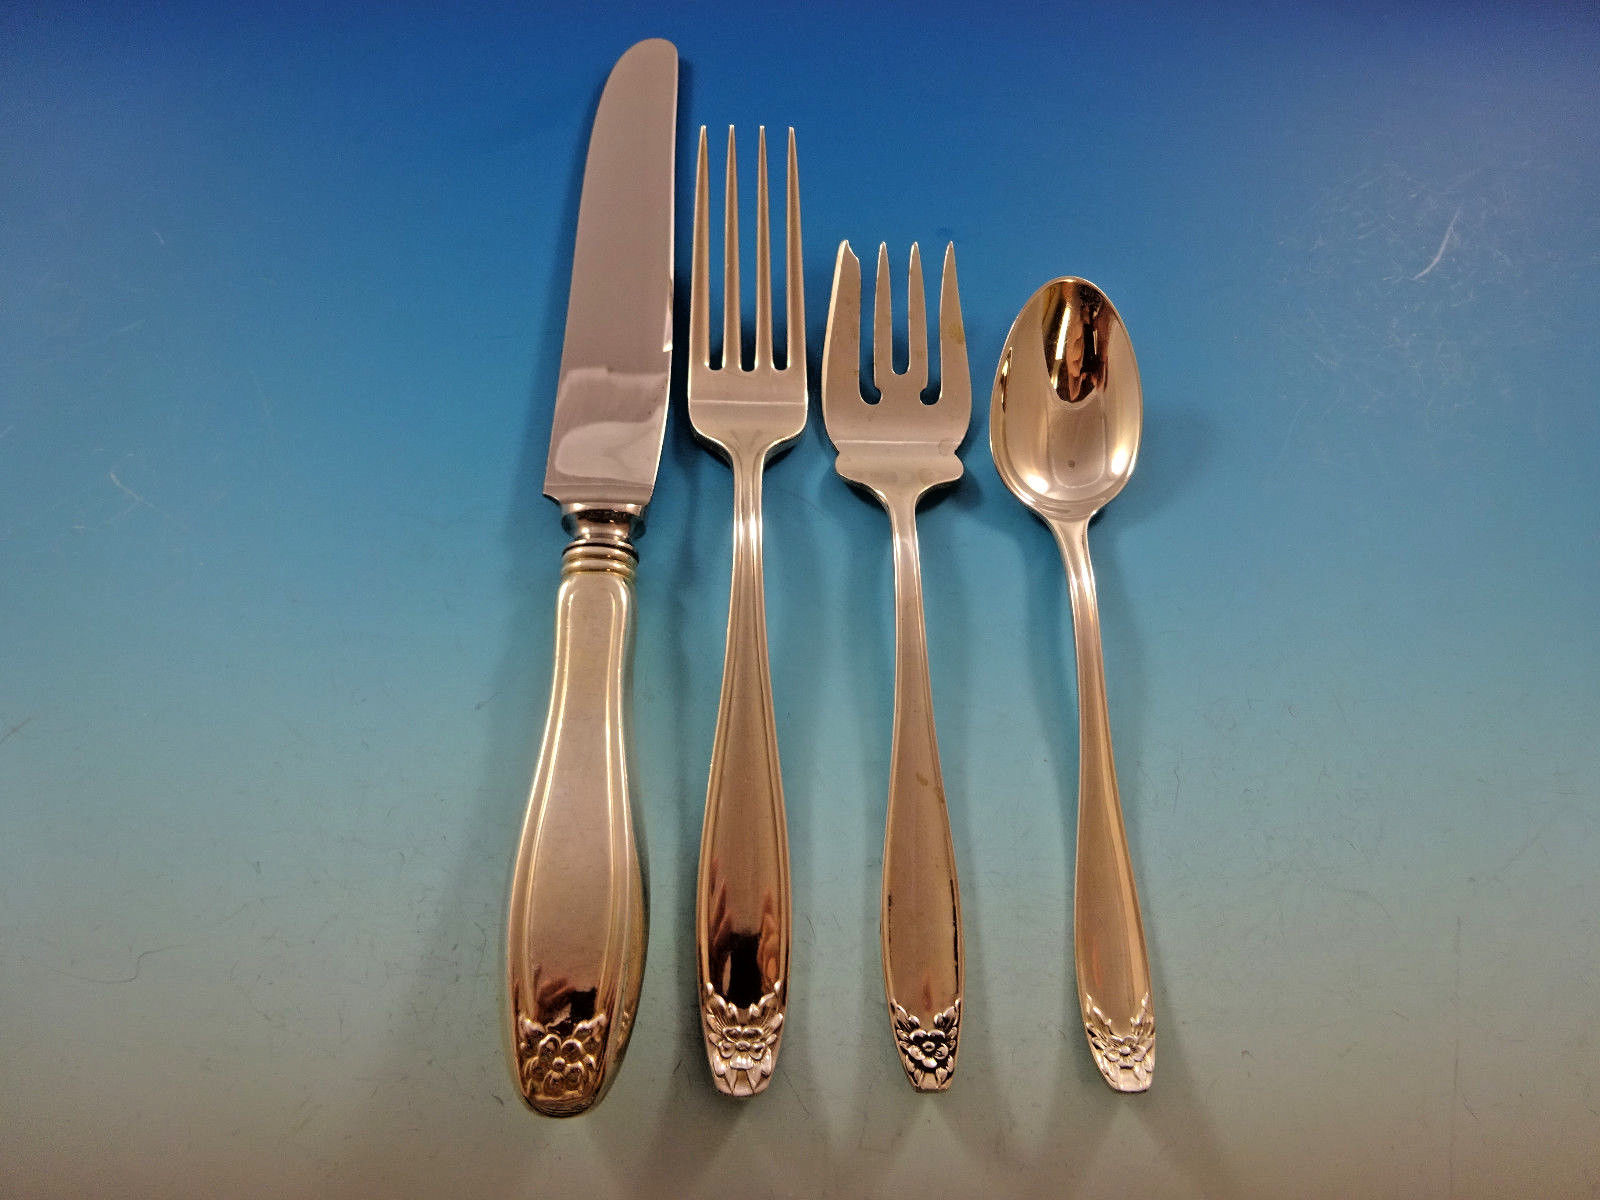 Puritan by Stieff Sterling Silver Flatware Set for 8 Service 37 pieces - $2,178.00